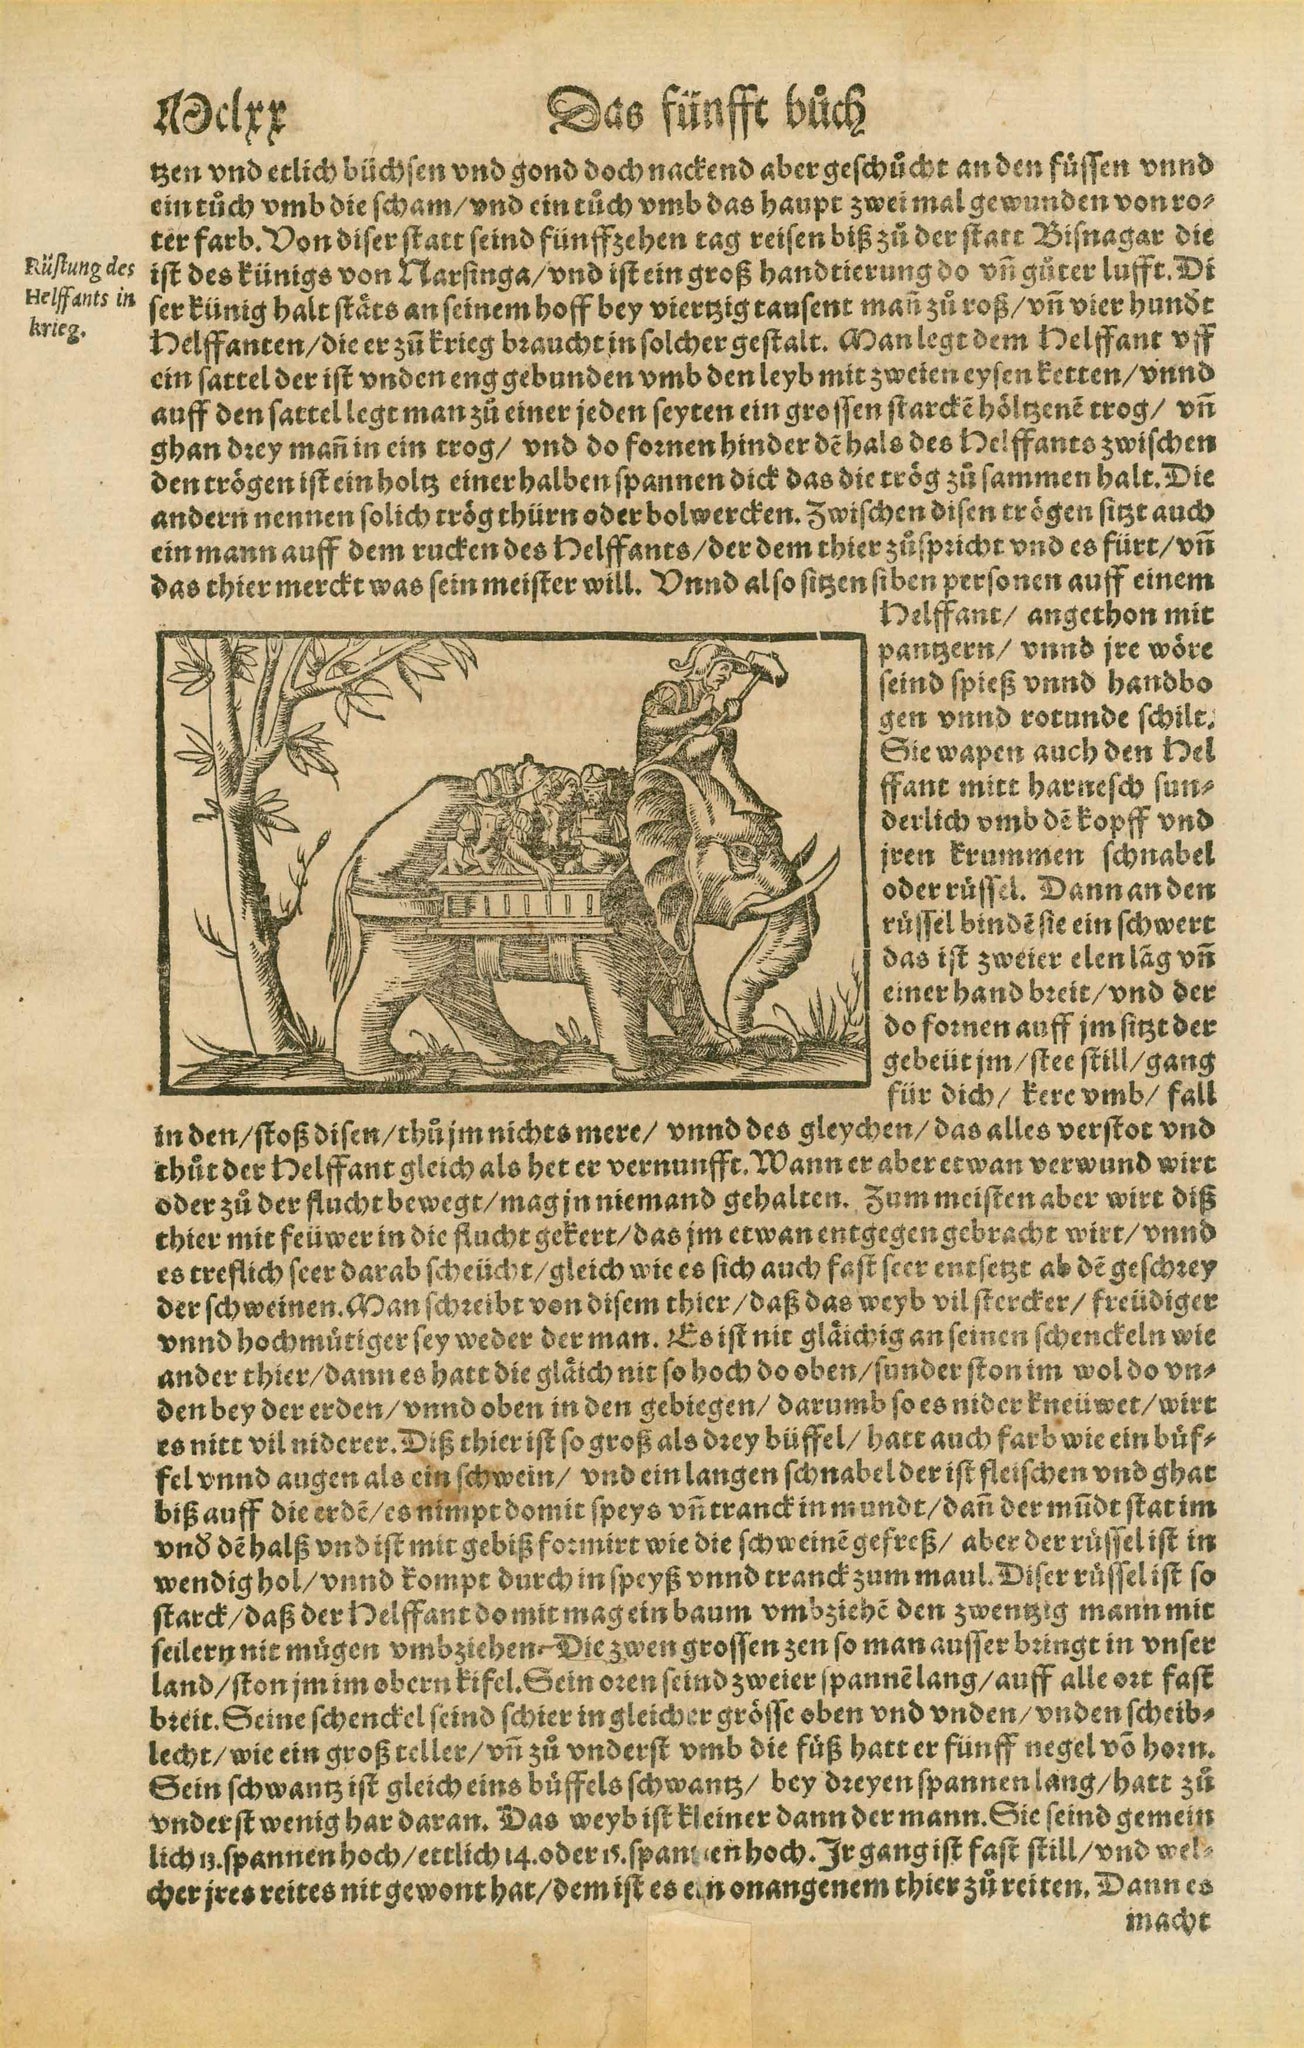 "New India mit seinen lendern..."  Woodcut of an early exploration ship and a woodcut of an elephant carrying soldiers/explorers on the reverse side. Interesting text about early discovery of India and decription of elephants.  Published in "Cosmographia"  By Sebastien Muenster (1488-1552)  Original antique print  